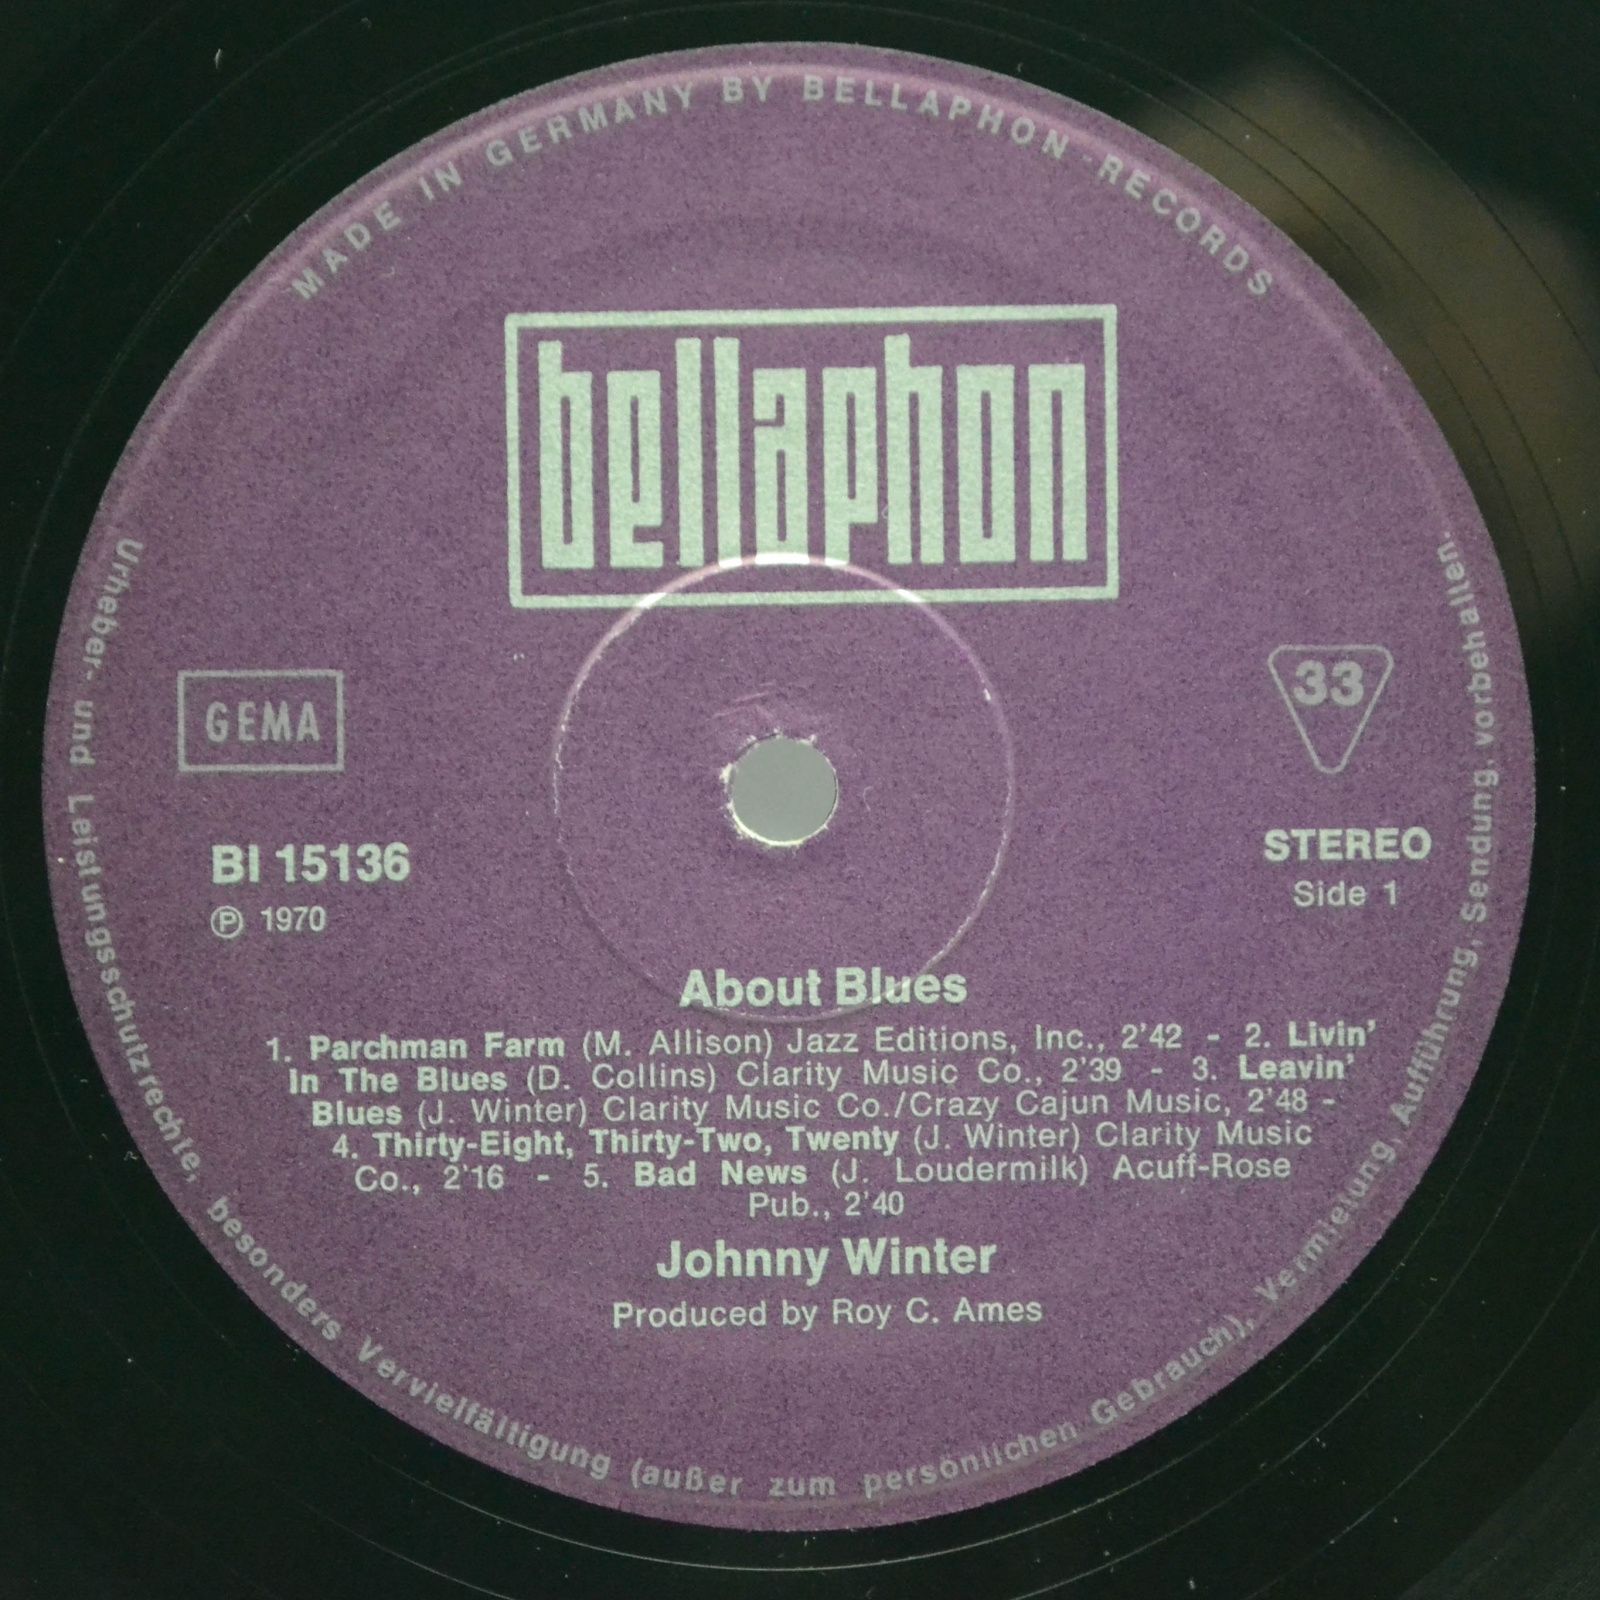 Johnny Winter — About Blues, 1969